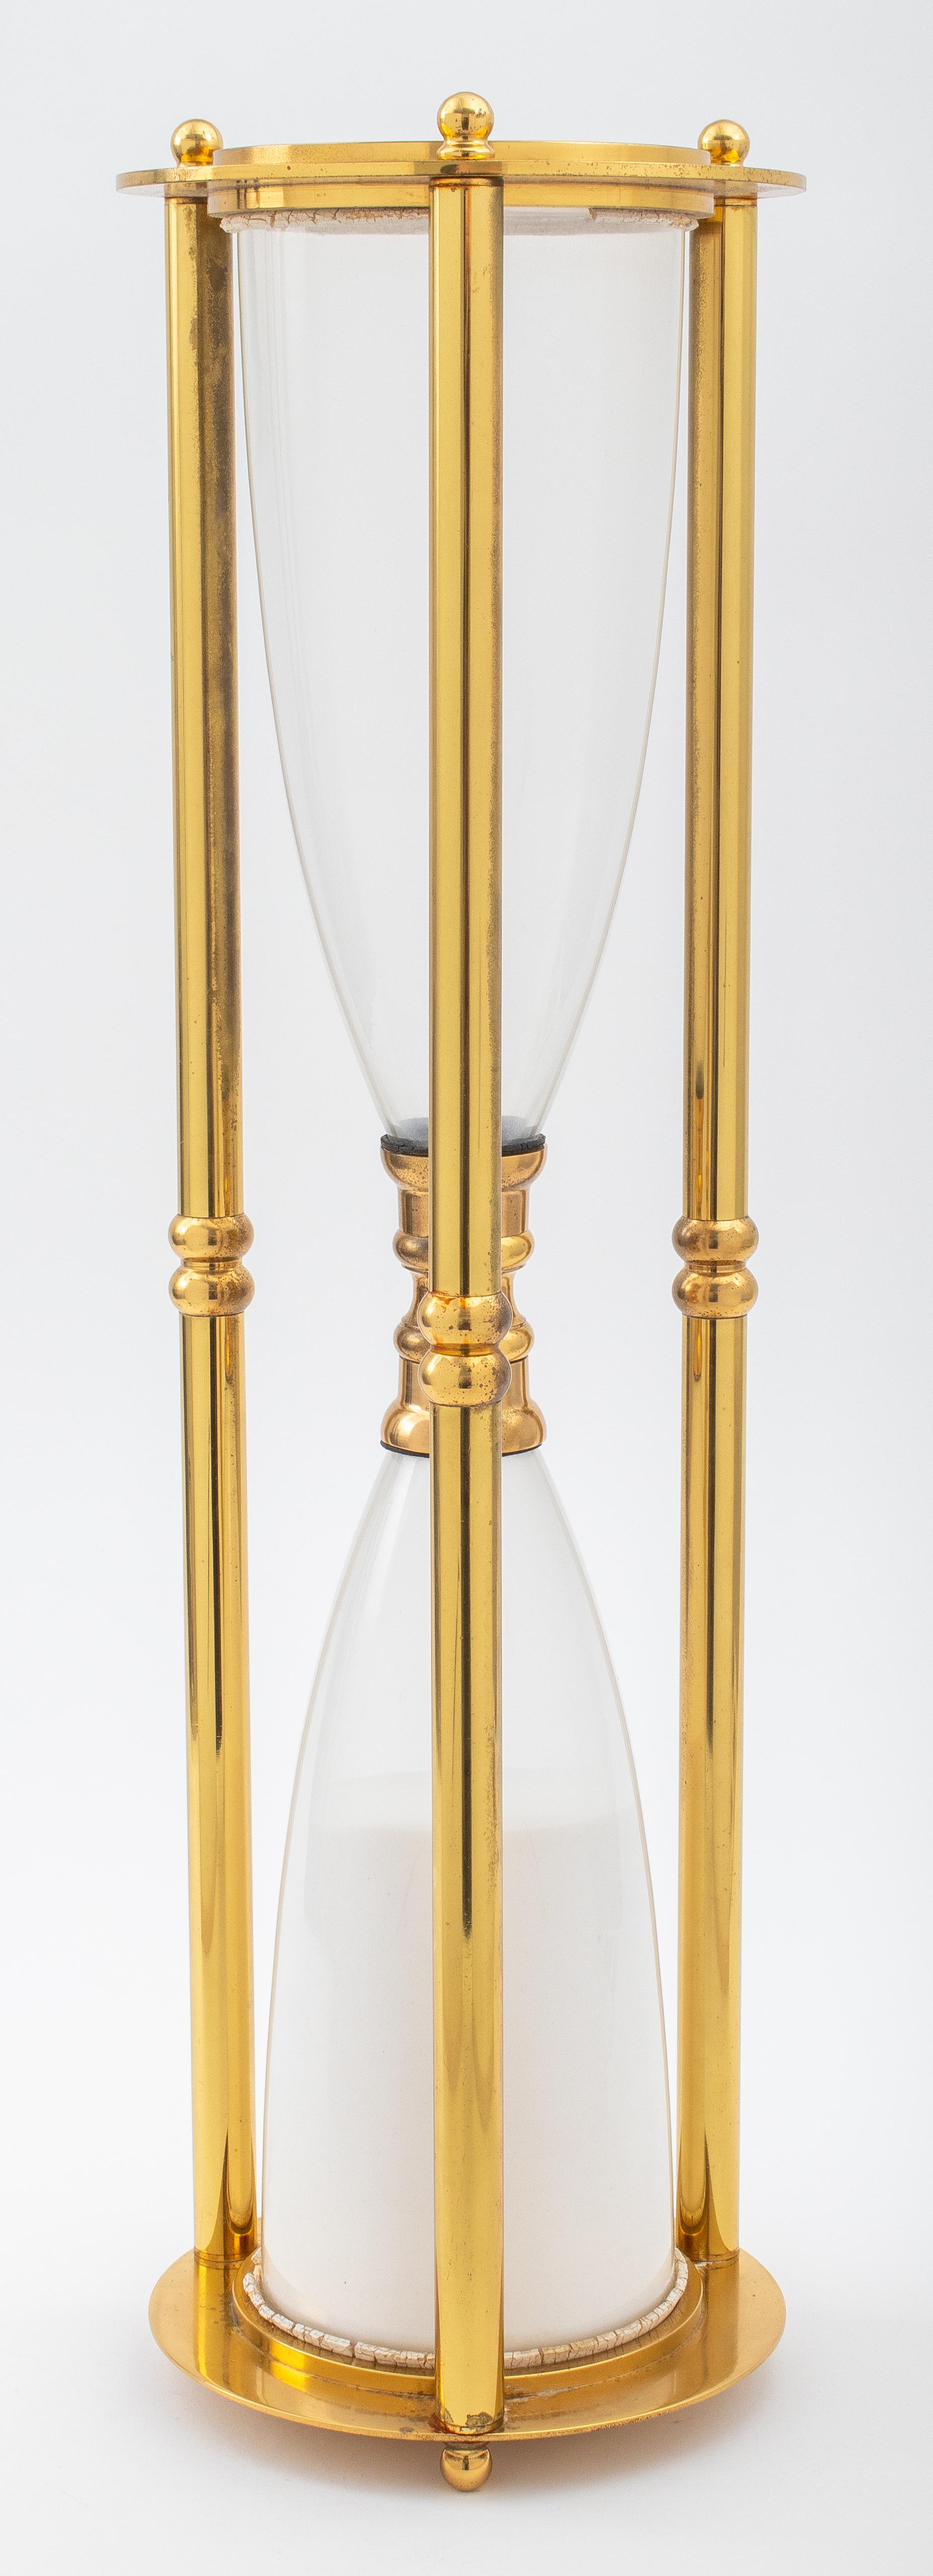 Modern large brass white sand hourglass / timer, unmarked. This item is not functional. 
Dimensions: 24.25